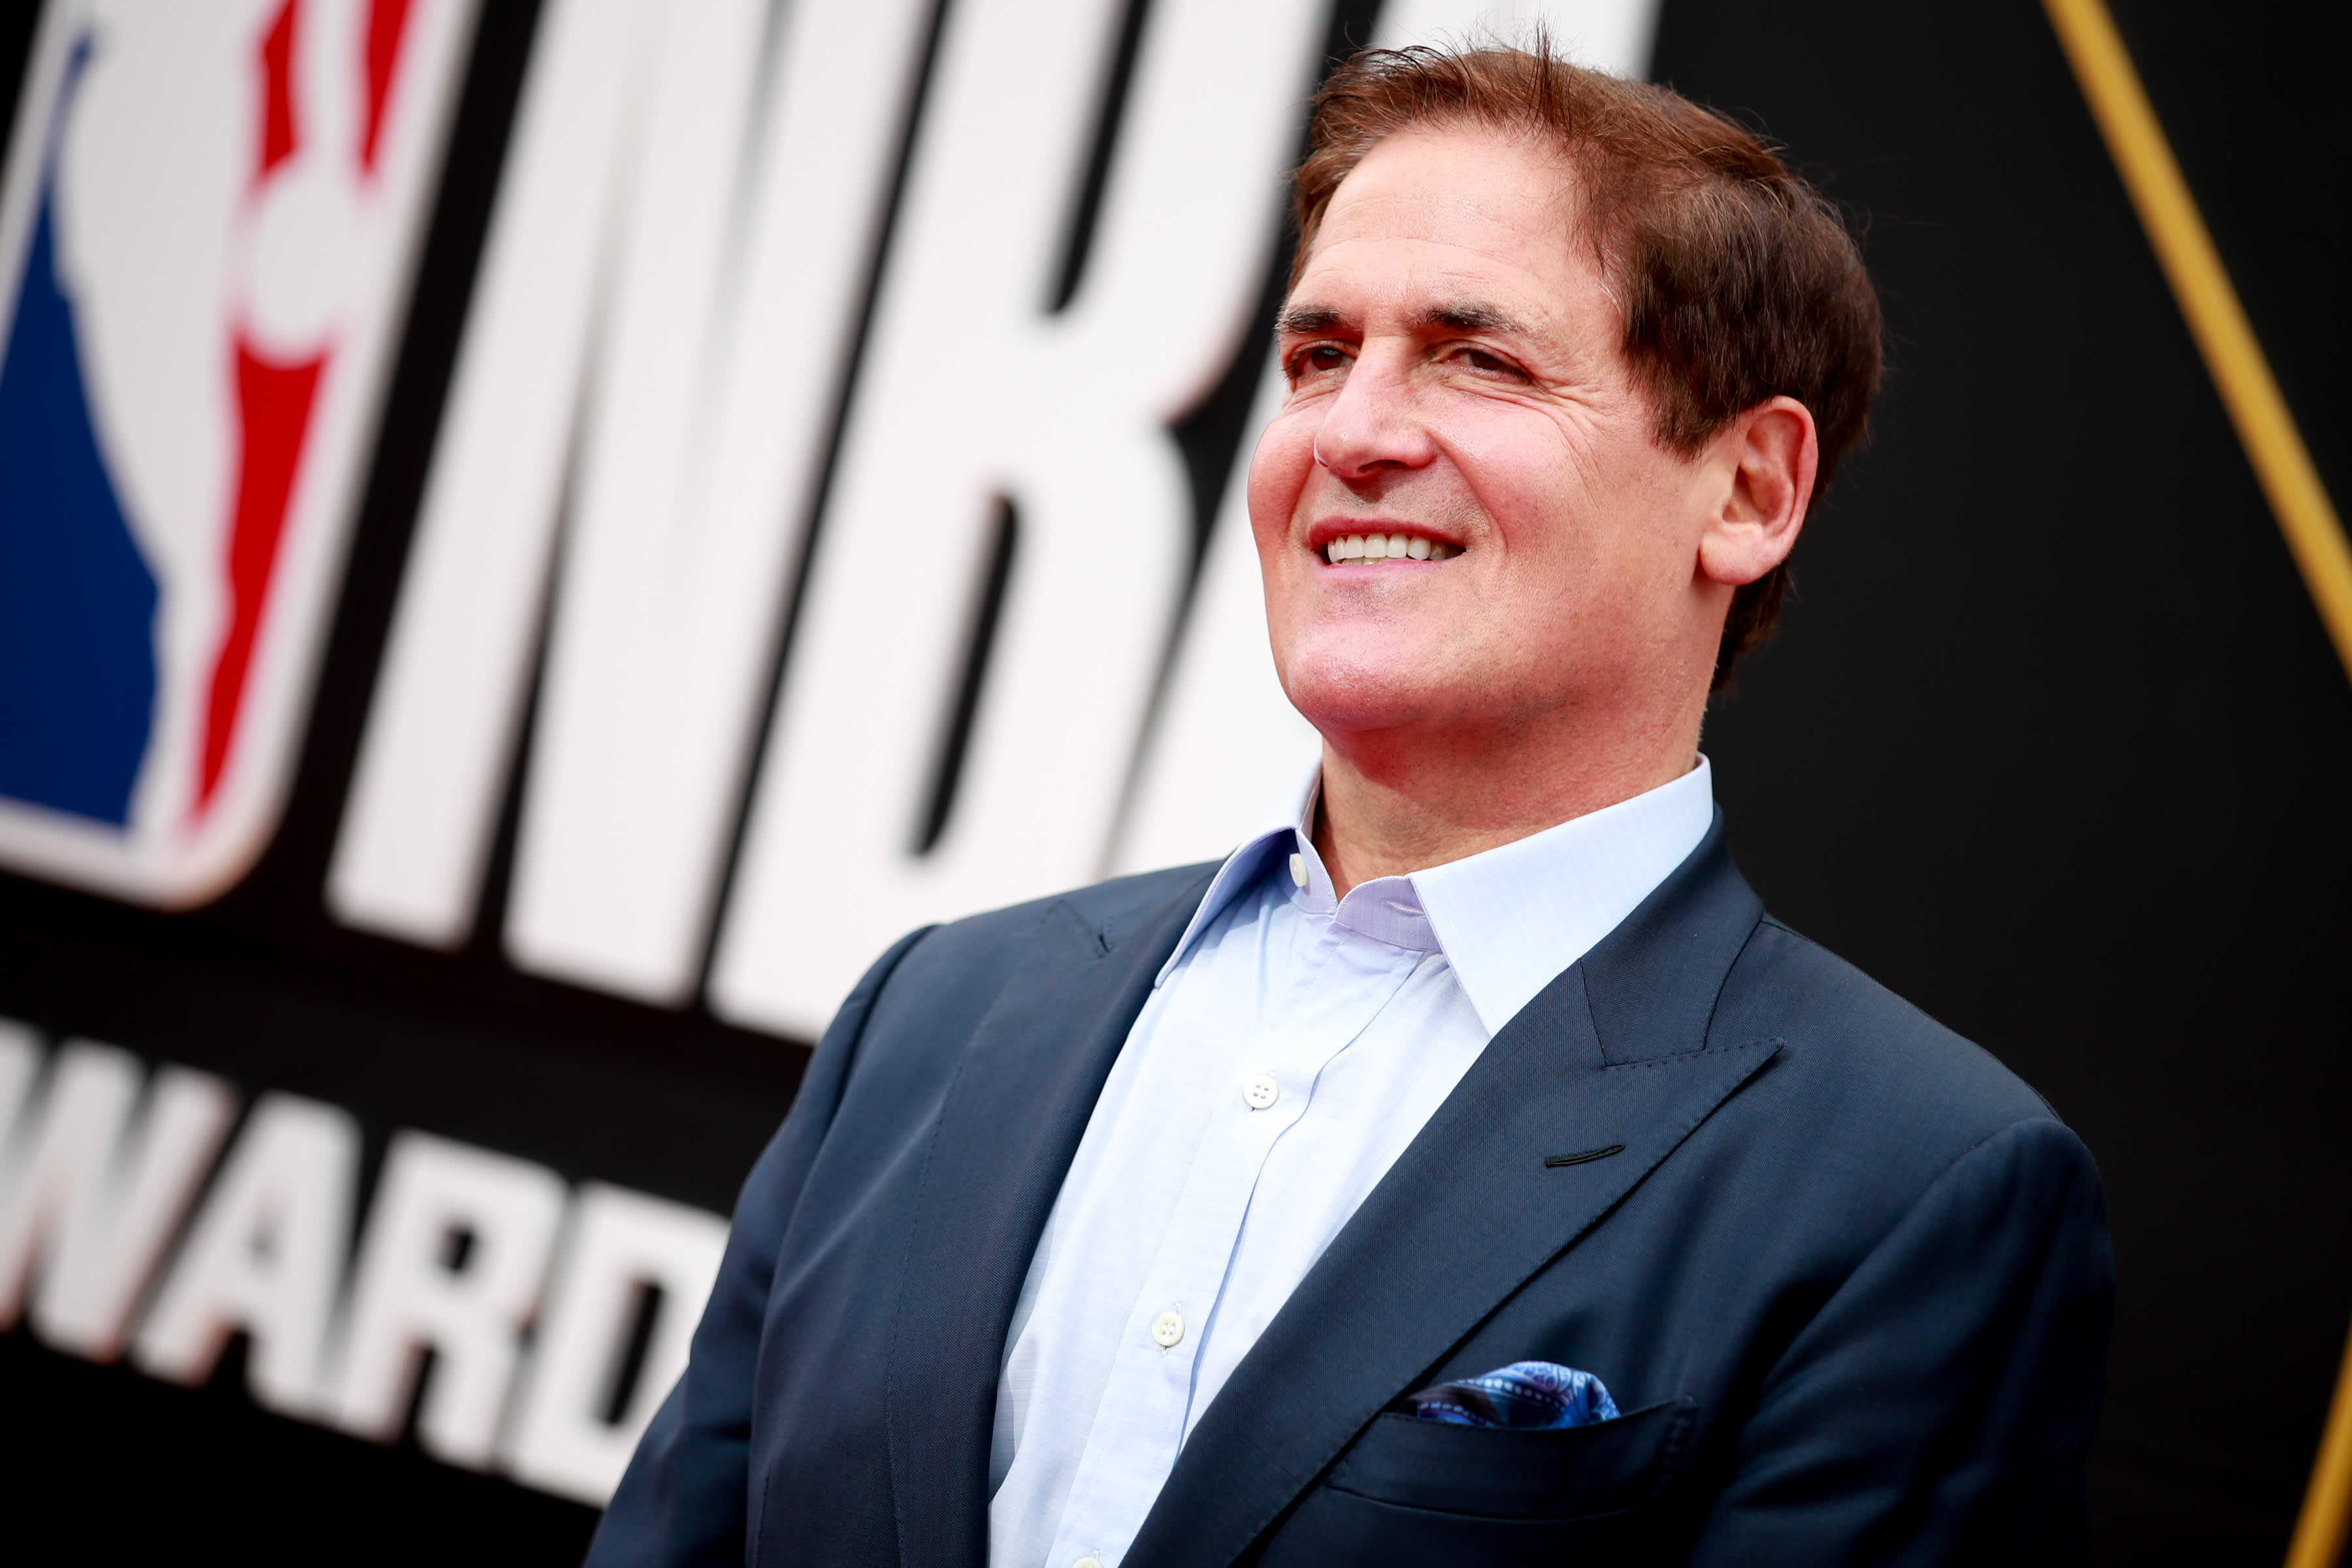 Self-made billionaire Mark Cuban shares the biggest misconception about becoming super rich